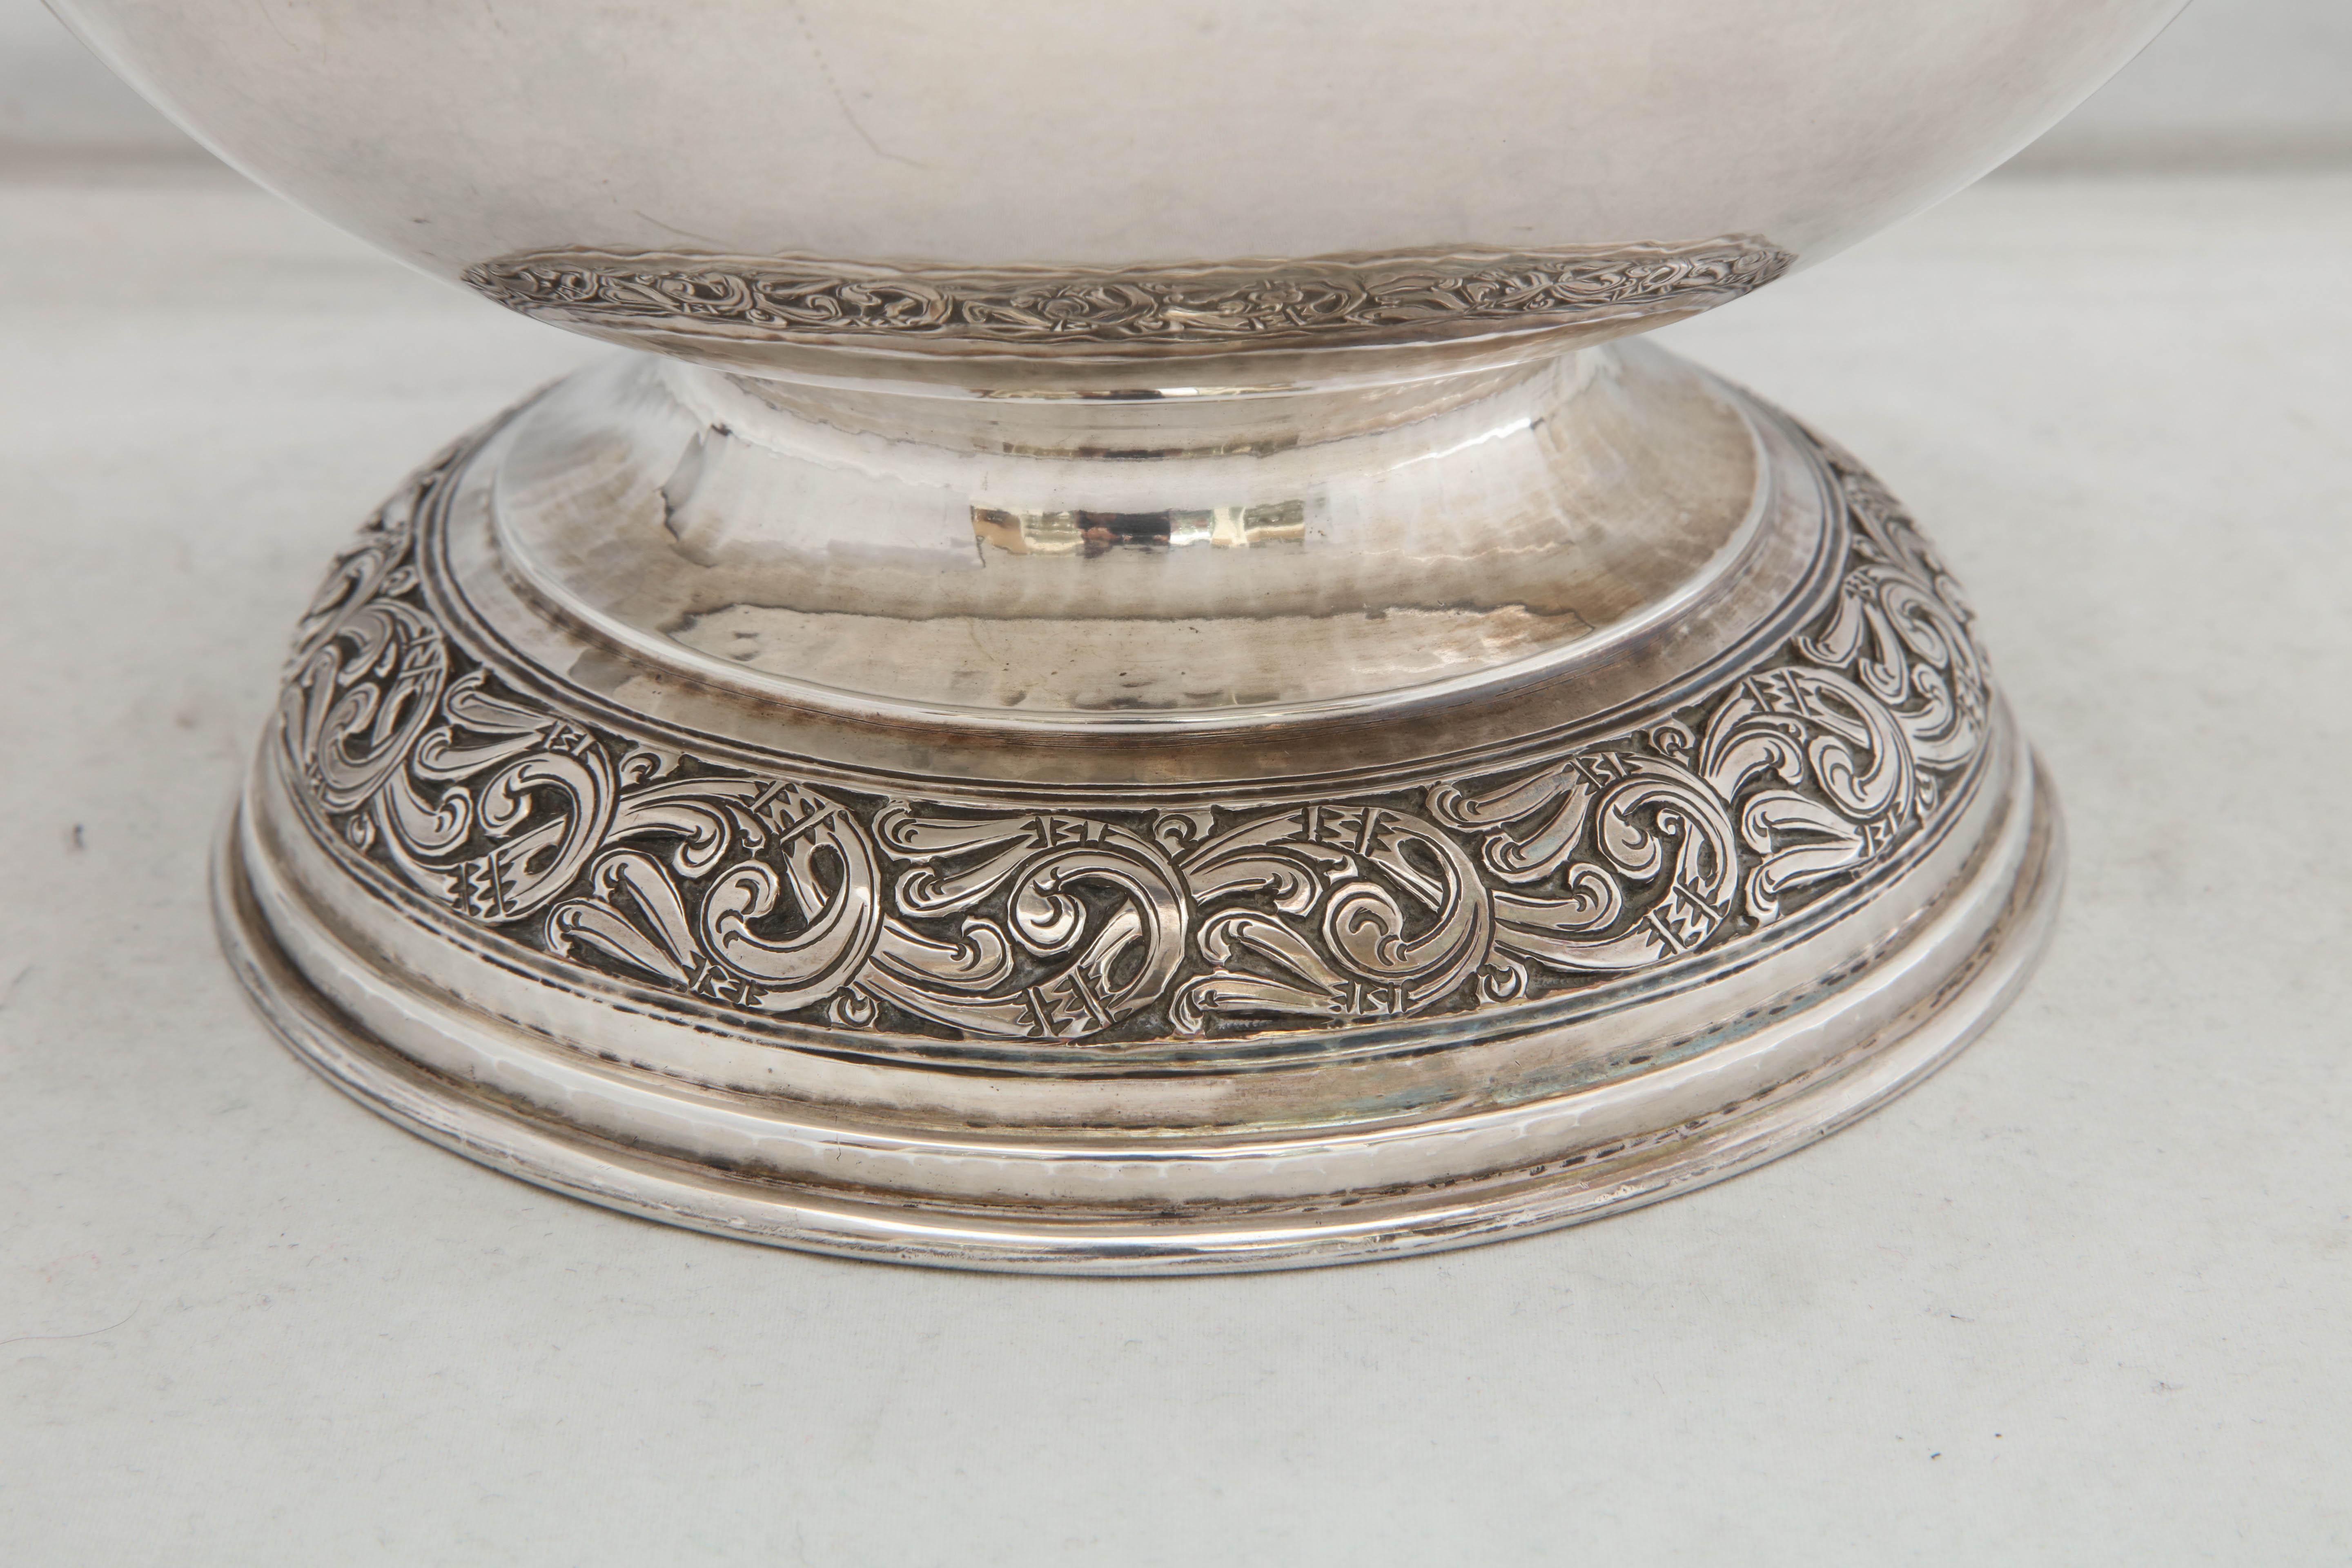 Arts and Crafts Sterling Silver Celtic-Style pedestal-based  bowl, Birmingham, England, 1913, Liberty and Company - makers. Lightly hammered. Celtic designs on upper border of bowl and on base. Measures 6 1/2 inches high x 9 inches diameter. Weighs